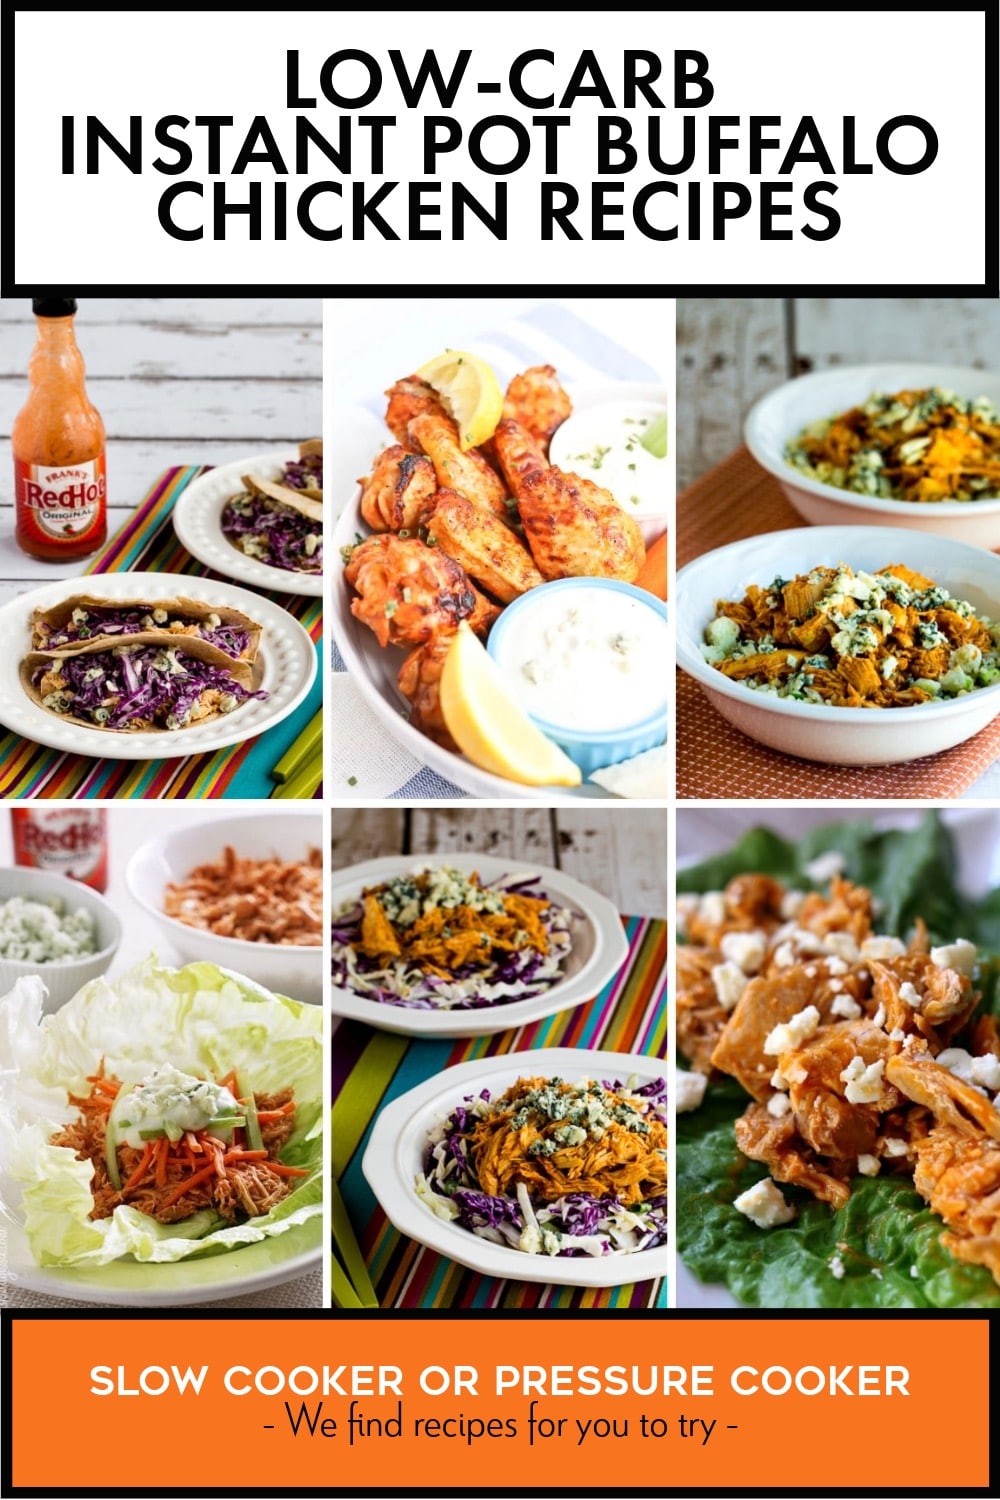 Pinterest image of Low-Carb Instant Pot Buffalo Chicken Recipes